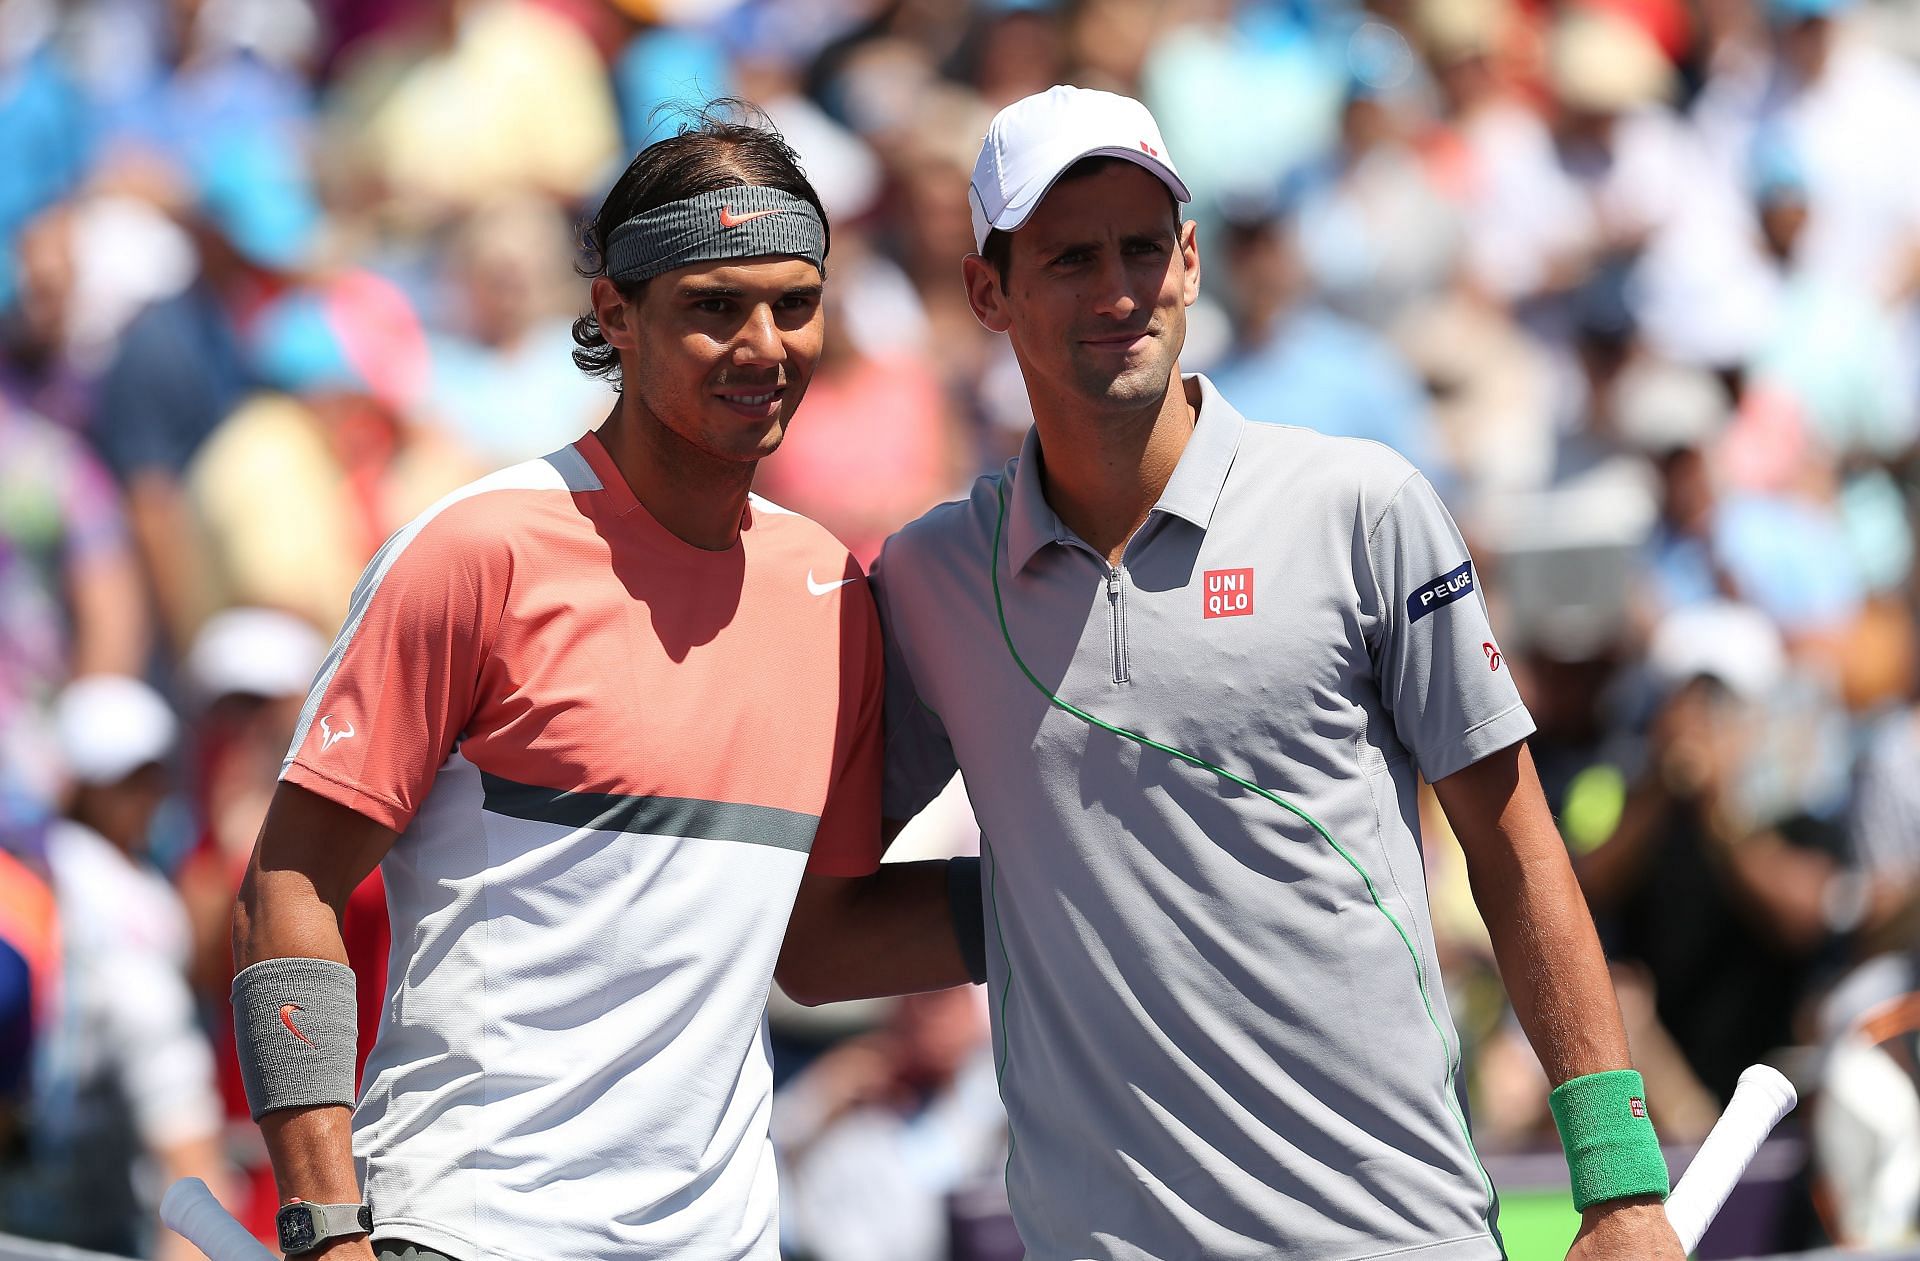 Rafael Nadal could meet Novak Djokovic as early as the quarterfinals at Roland Garros this year